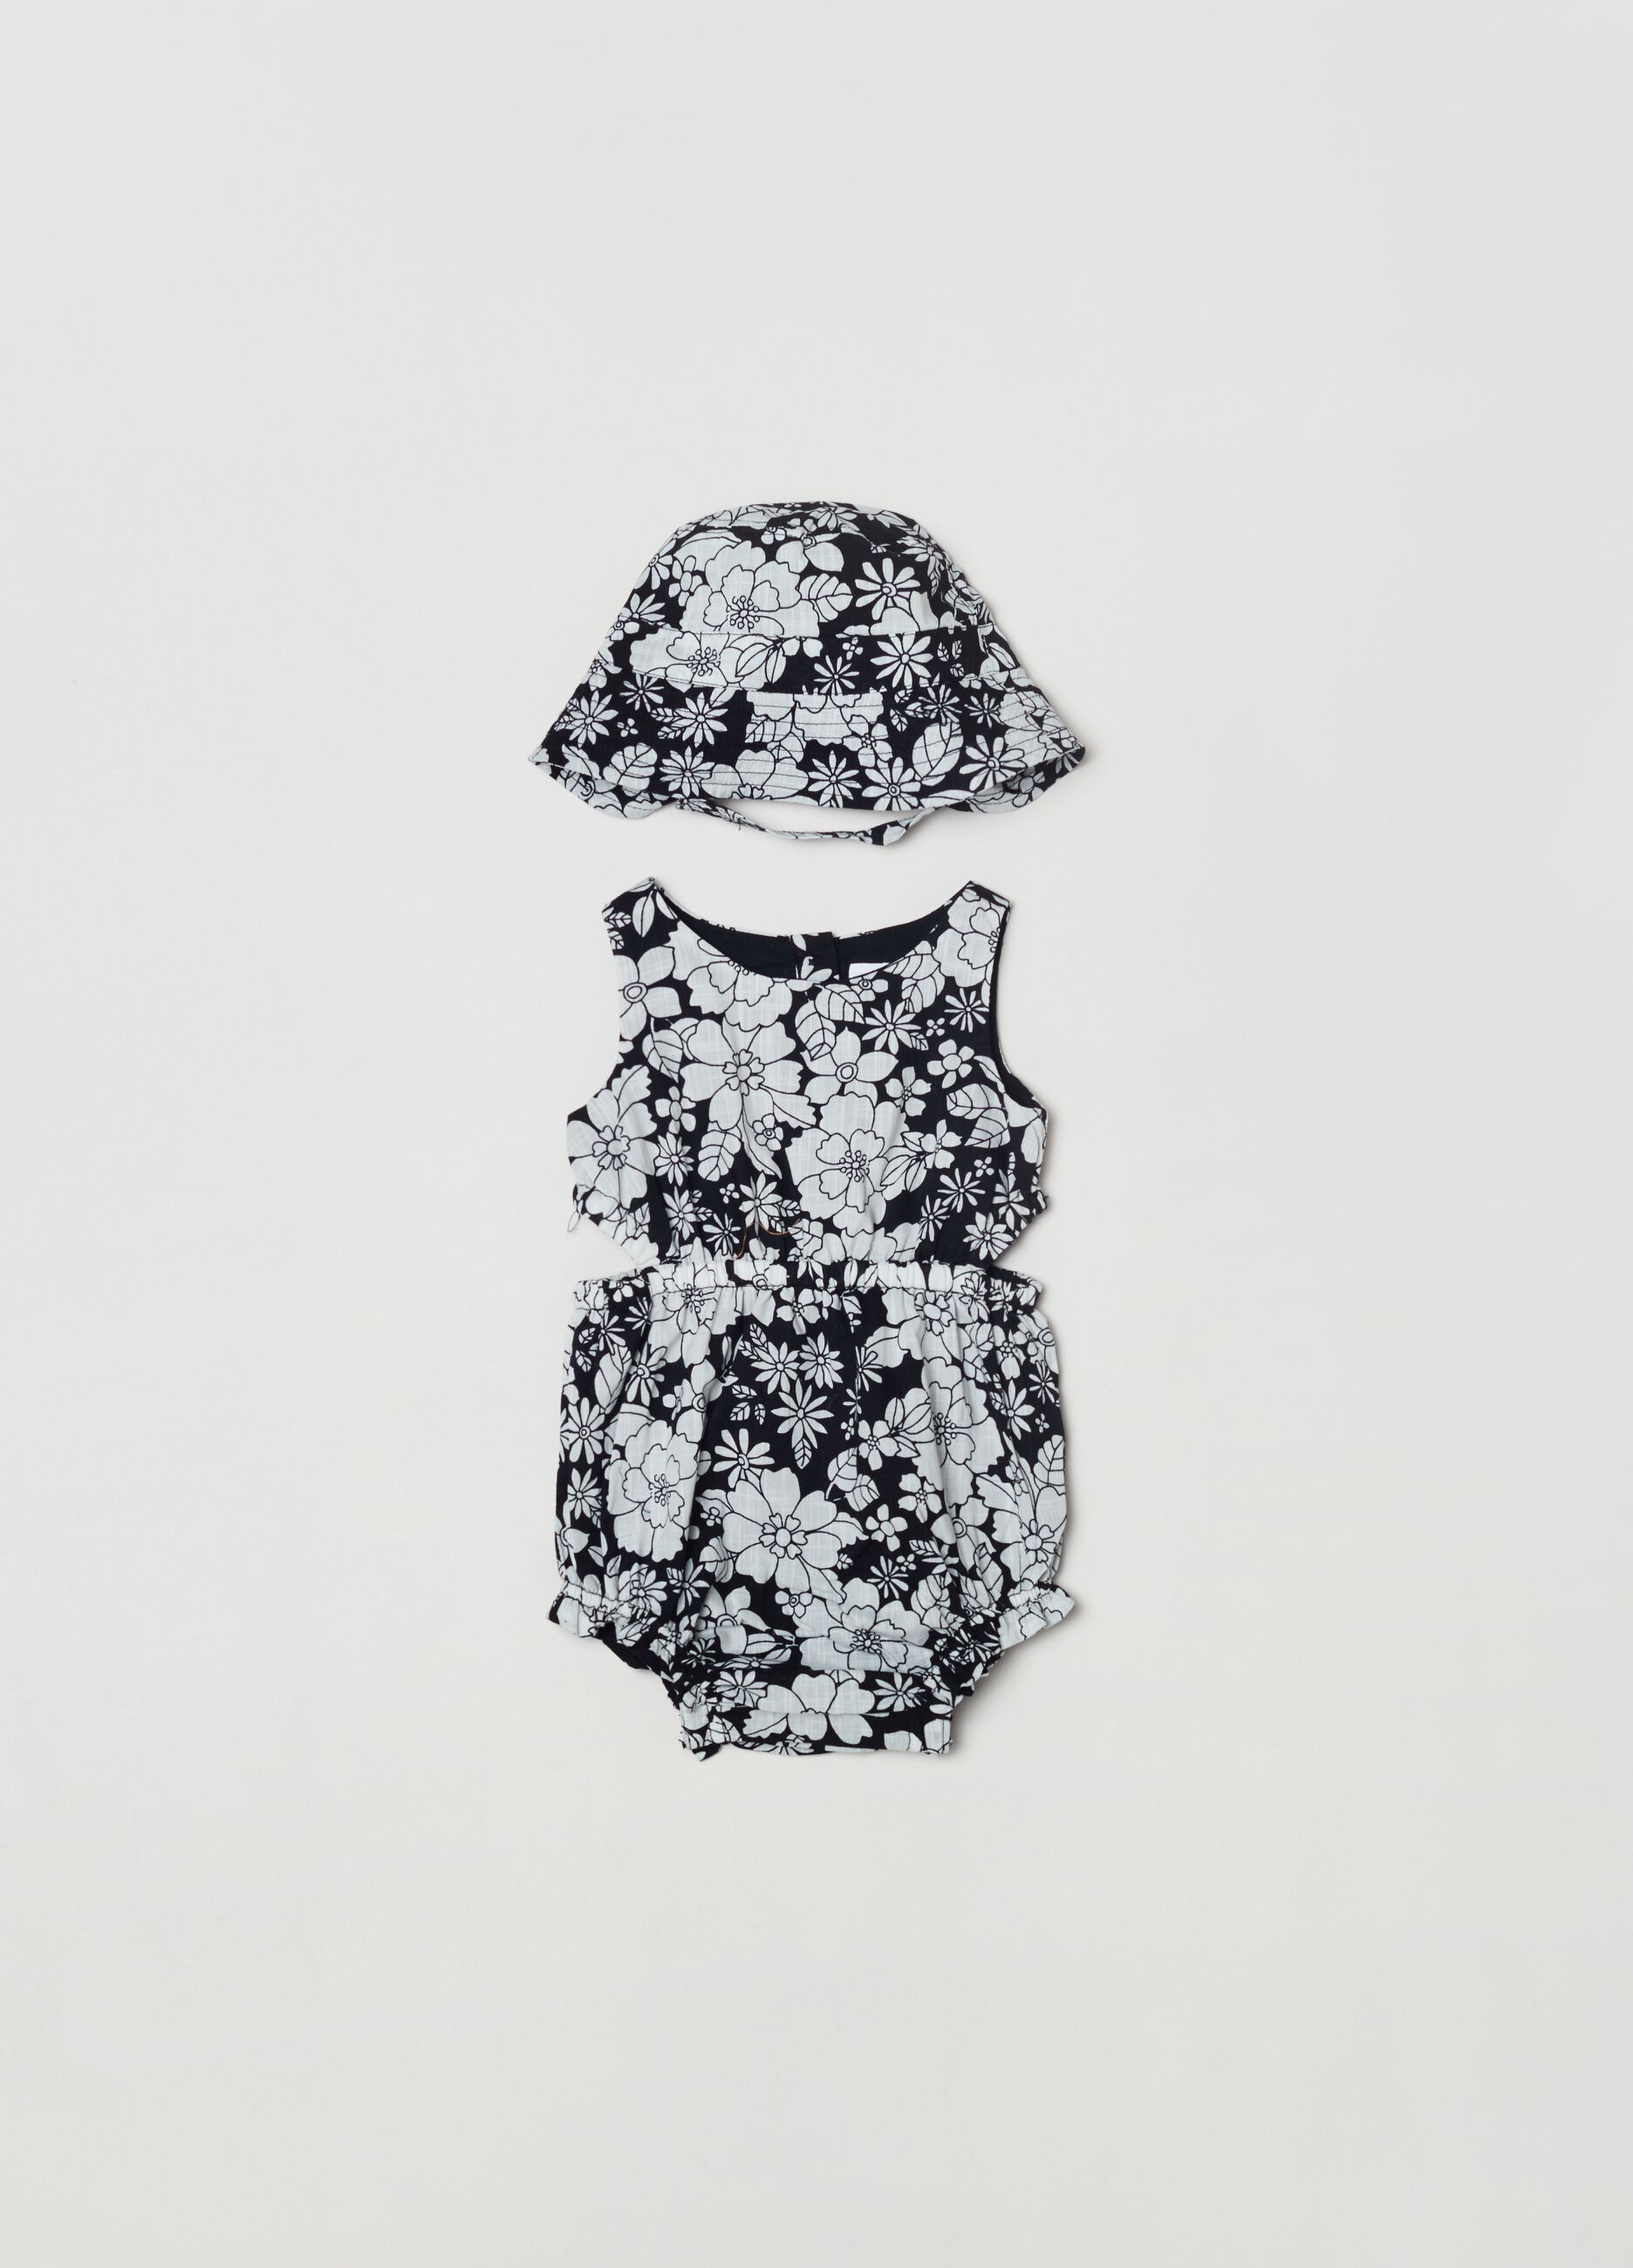 Romper suit and hat set with floral pattern